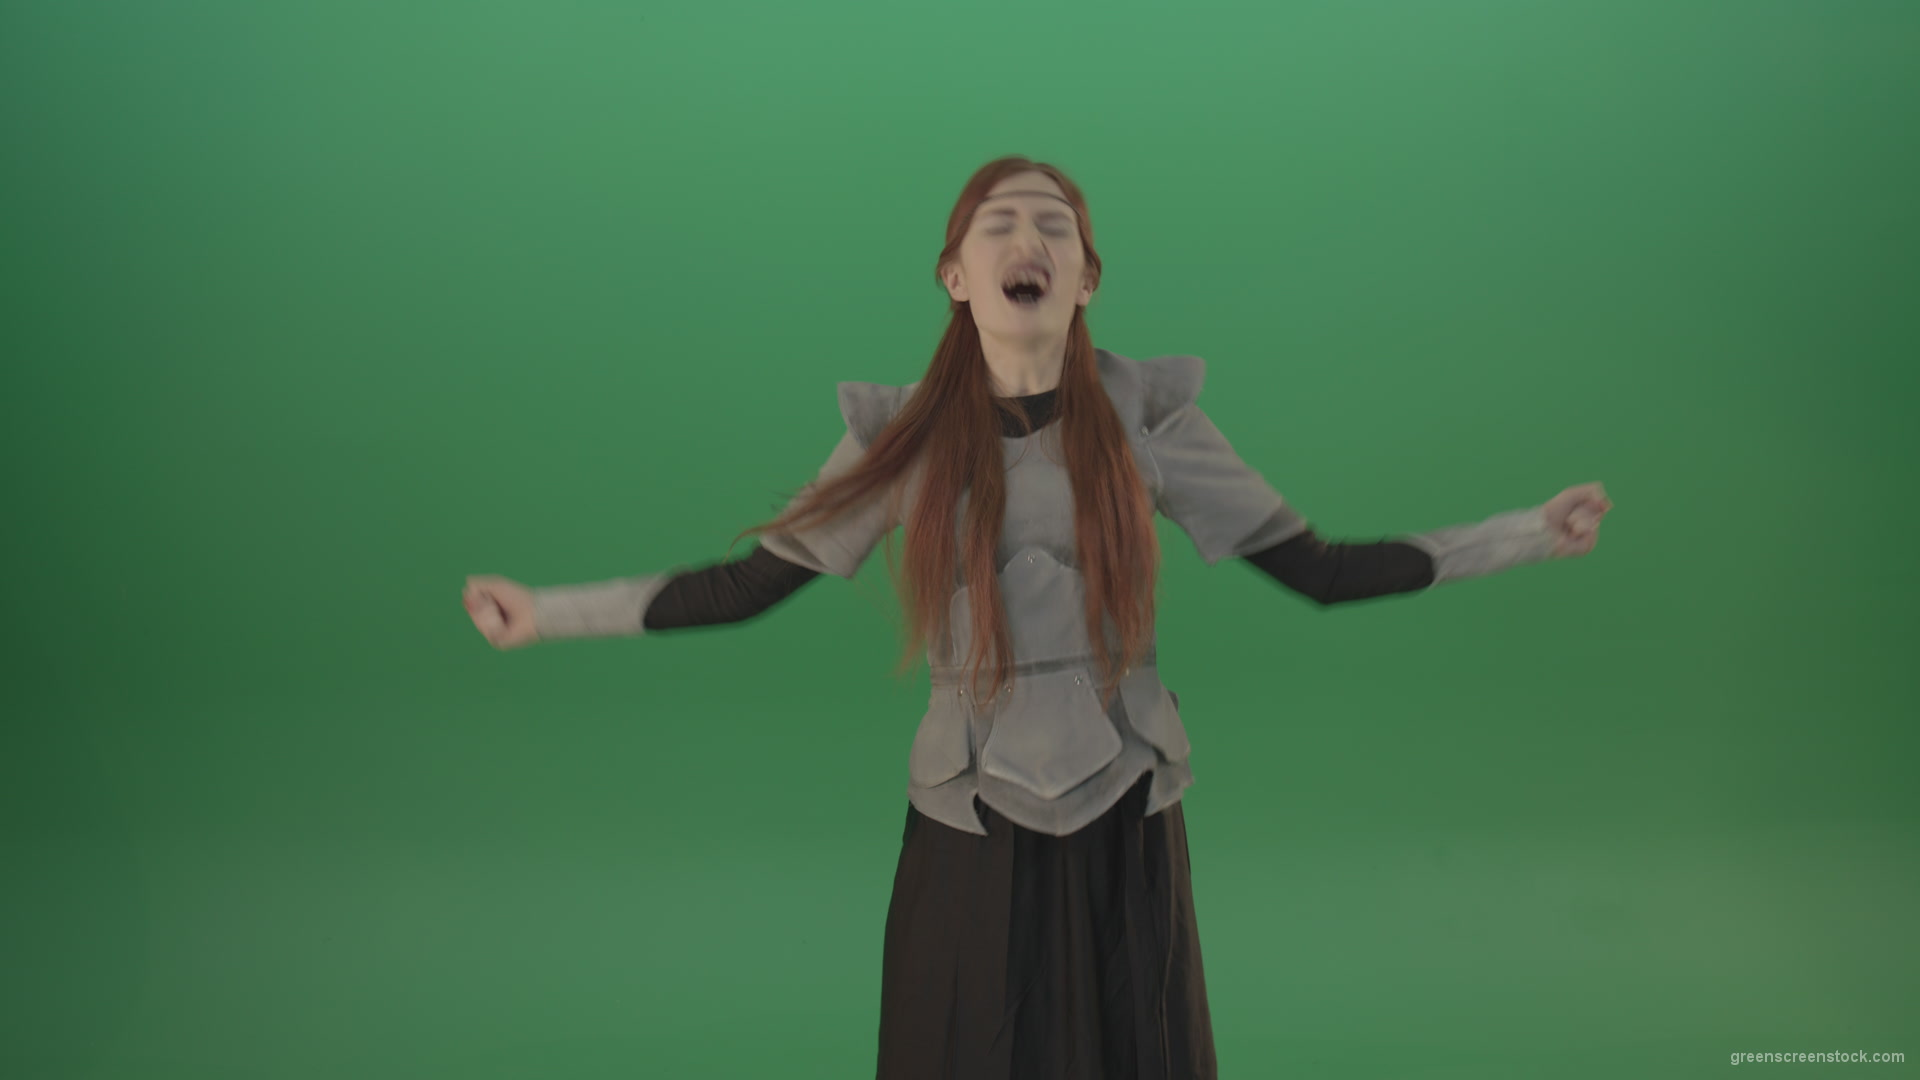 Cried-warrior-girl-releases-all-her-energy-cosplay-on-a-green-background_006 Green Screen Stock